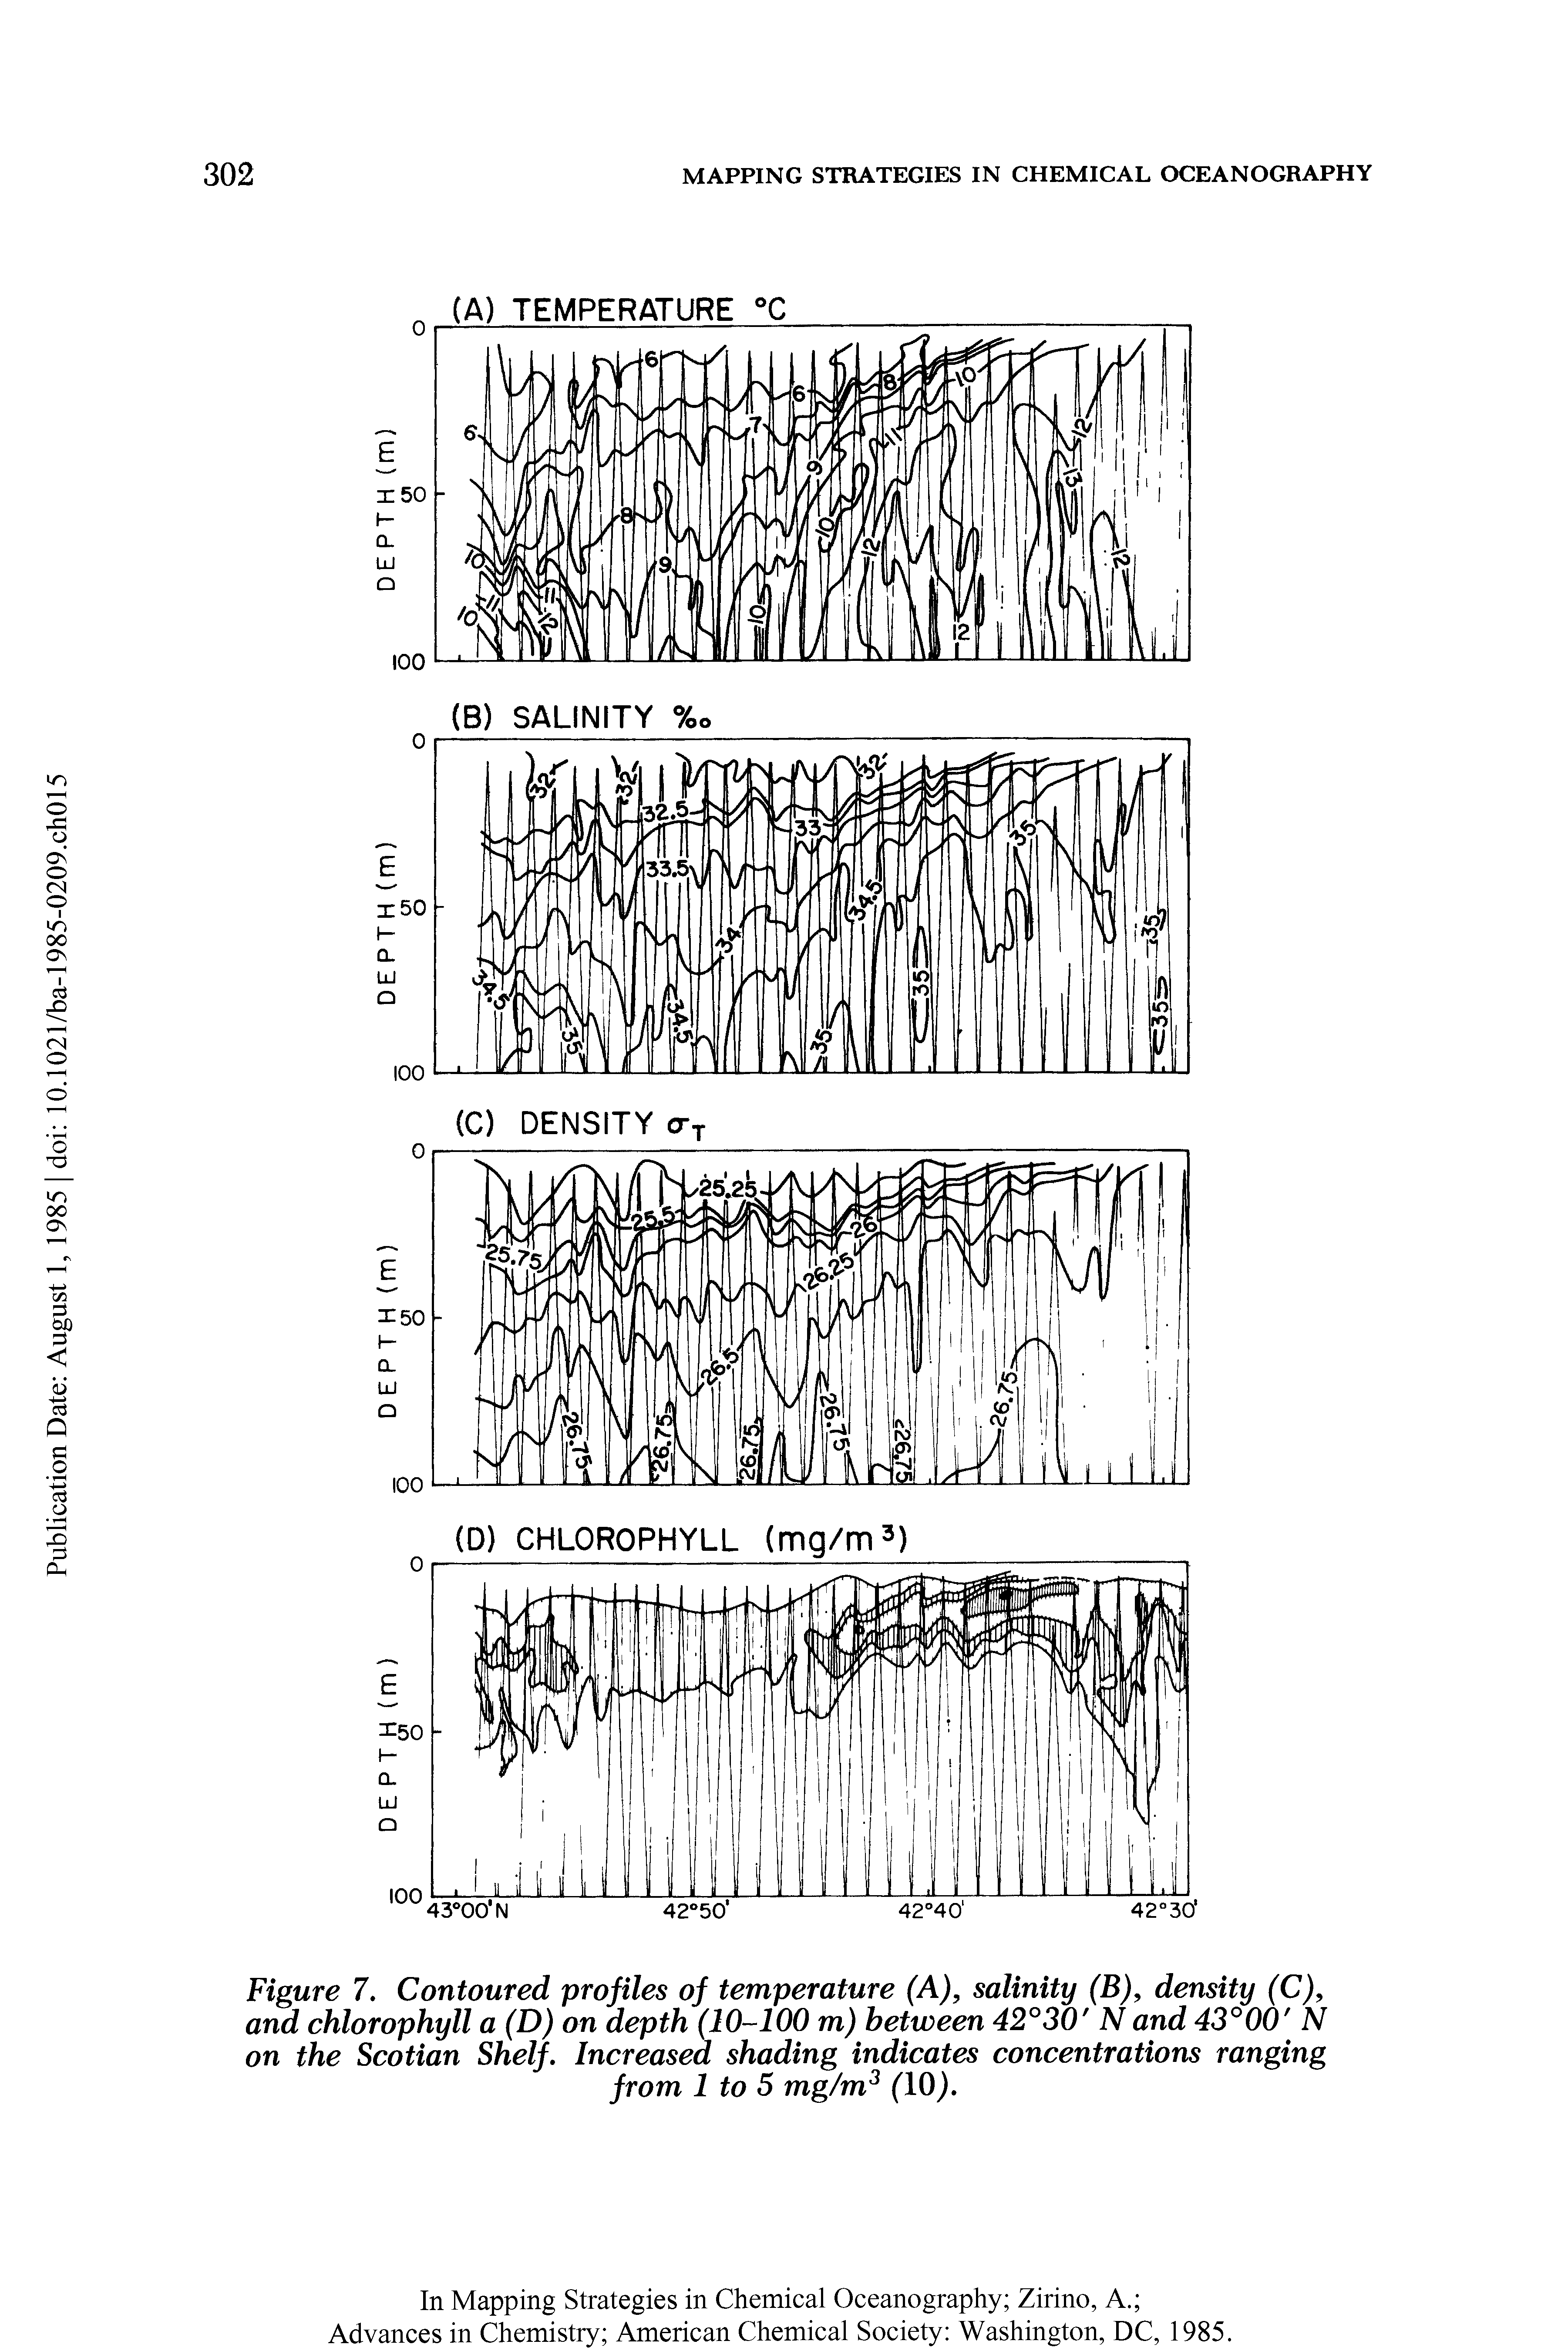 Figure 7. Contoured profiles of temperature (A), salinity (B), density (C), and chlorophyll a (D) on depth (10-100 m) between 42°30 N and 43°00 N on the Scotian Shelf. Increased shading indicates concentrations ranging from 1 to 5 mg/m (10).